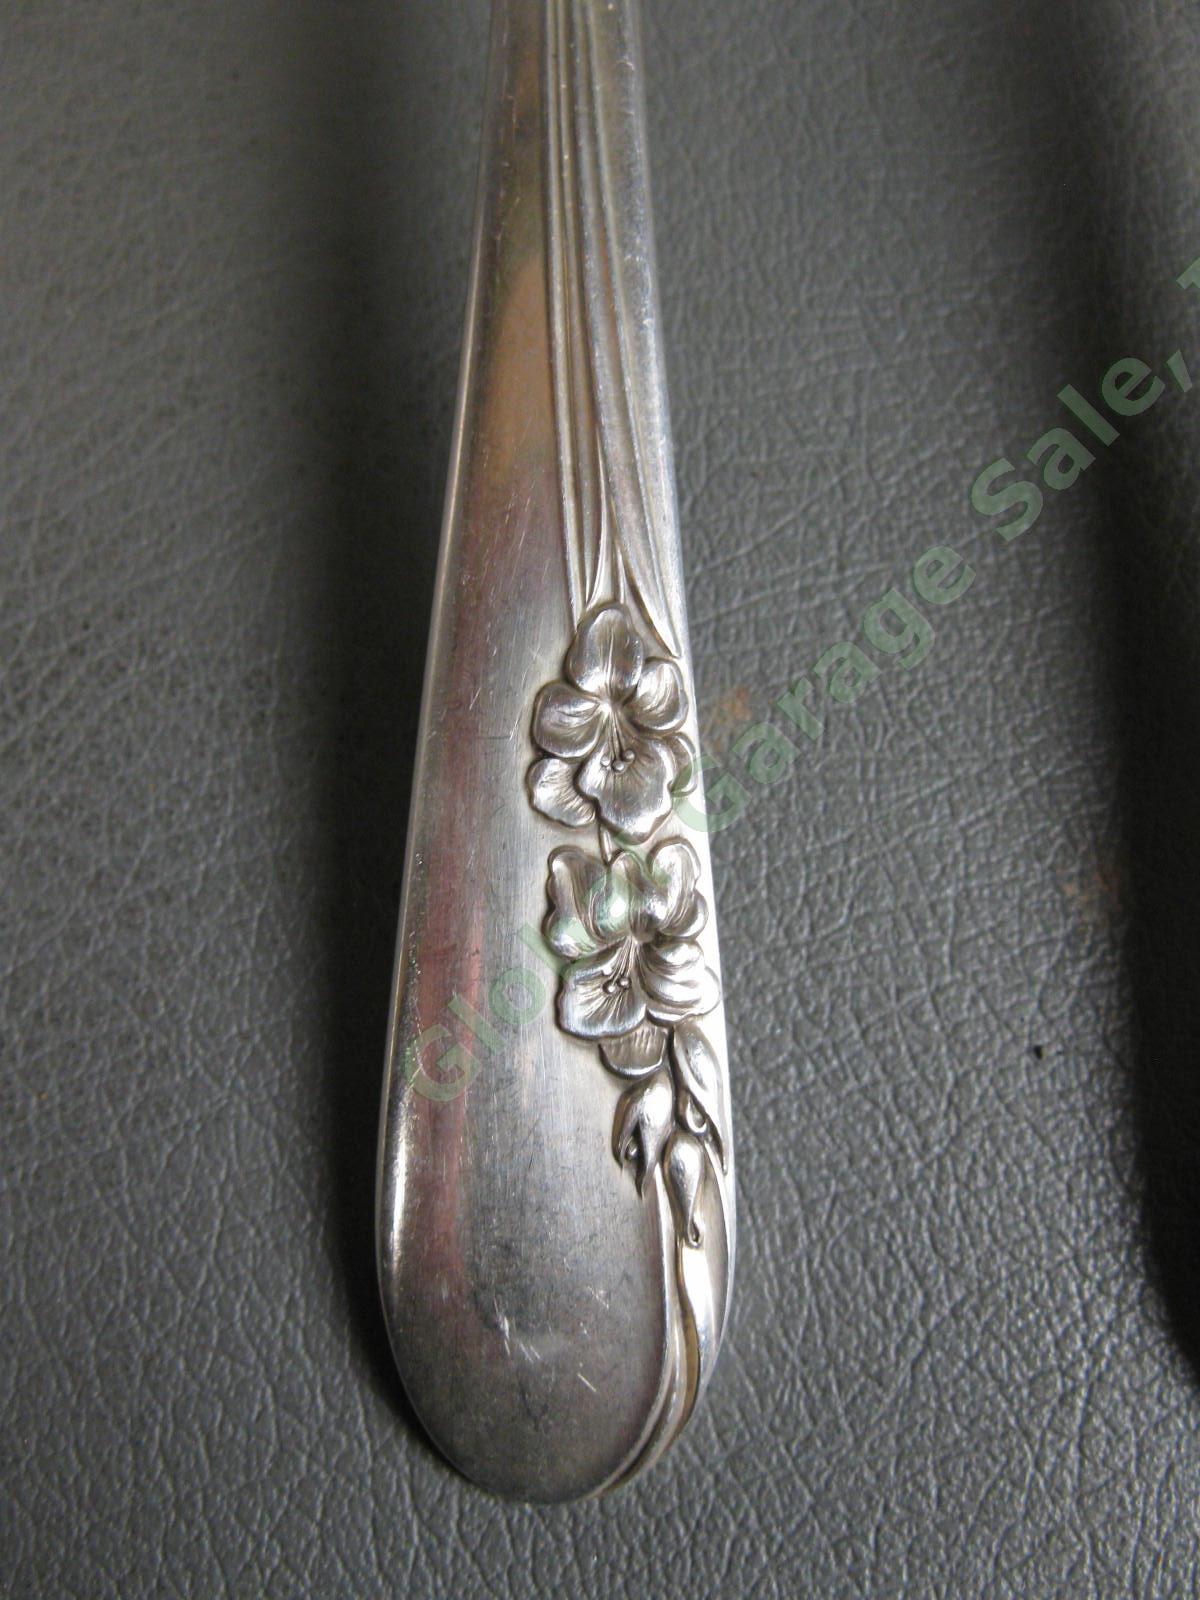 4 International Sterling Silver Blossom Time Tablespoons Serving Spoon Set 252g 1